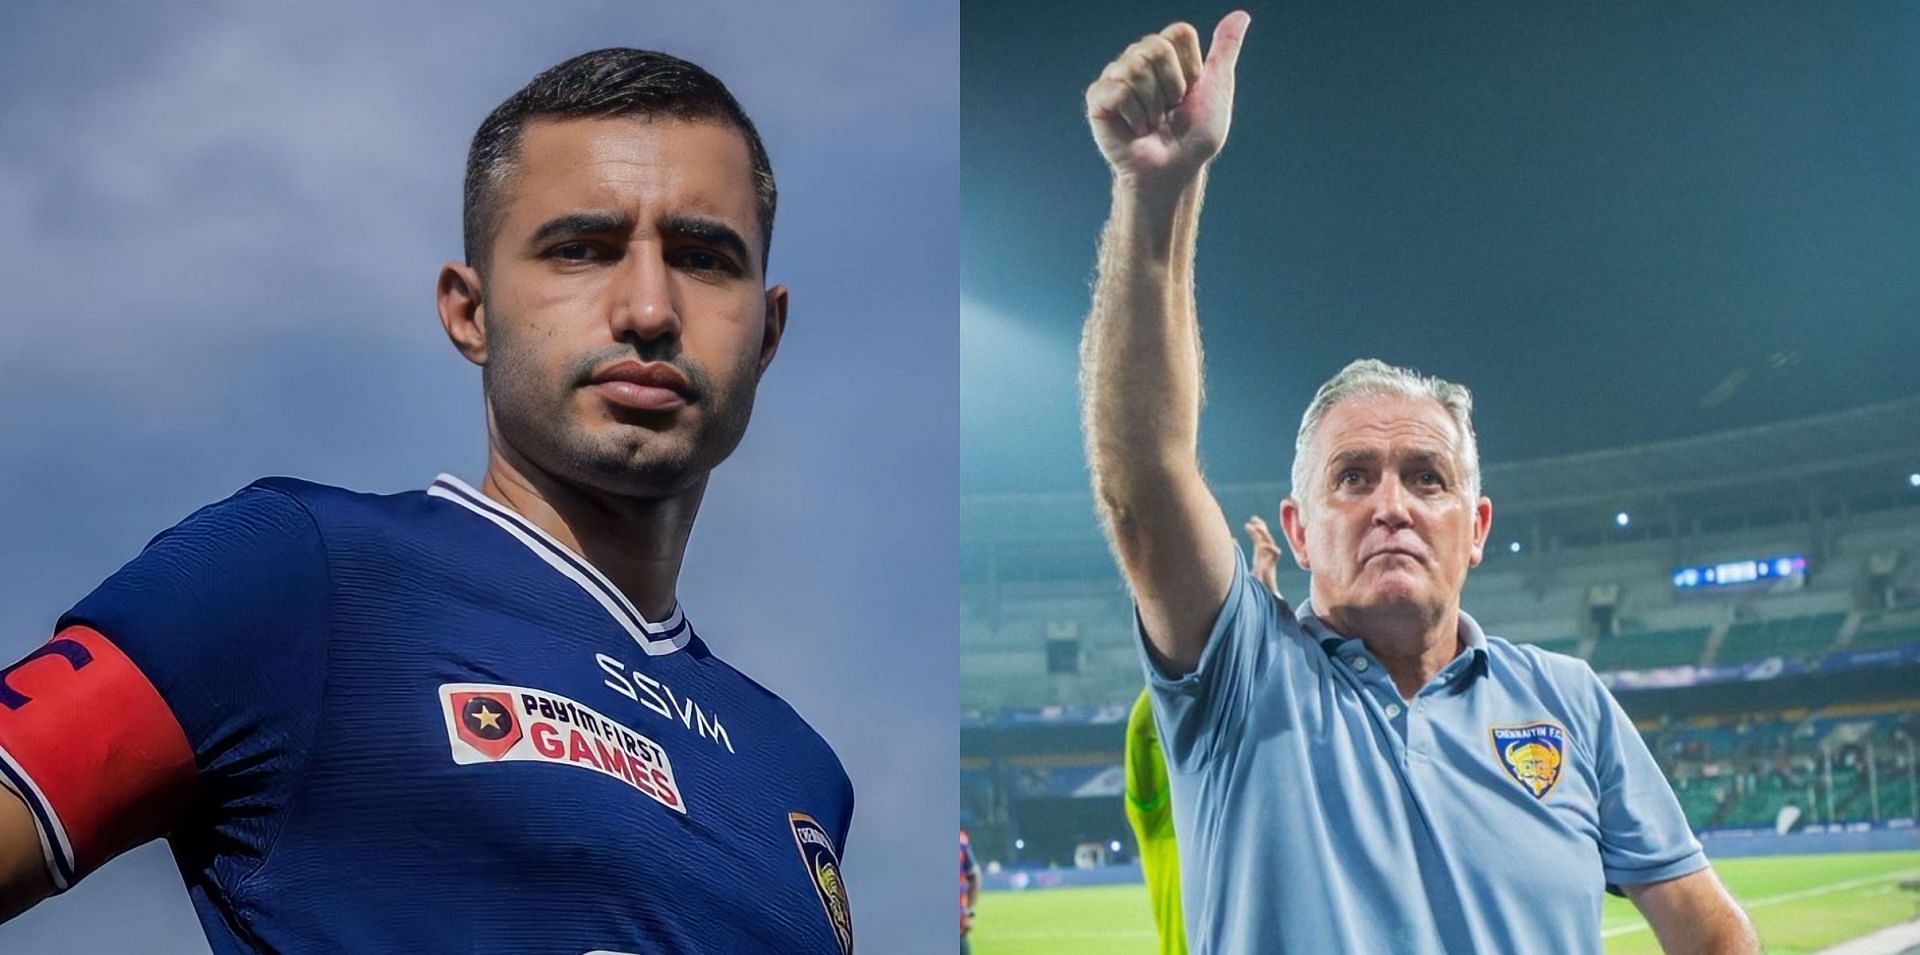 Owen Coyle and Rafael Crivellaro reunited at Chennaiyin FC ahead of this season and they share a very good bond that is most loved among the fans